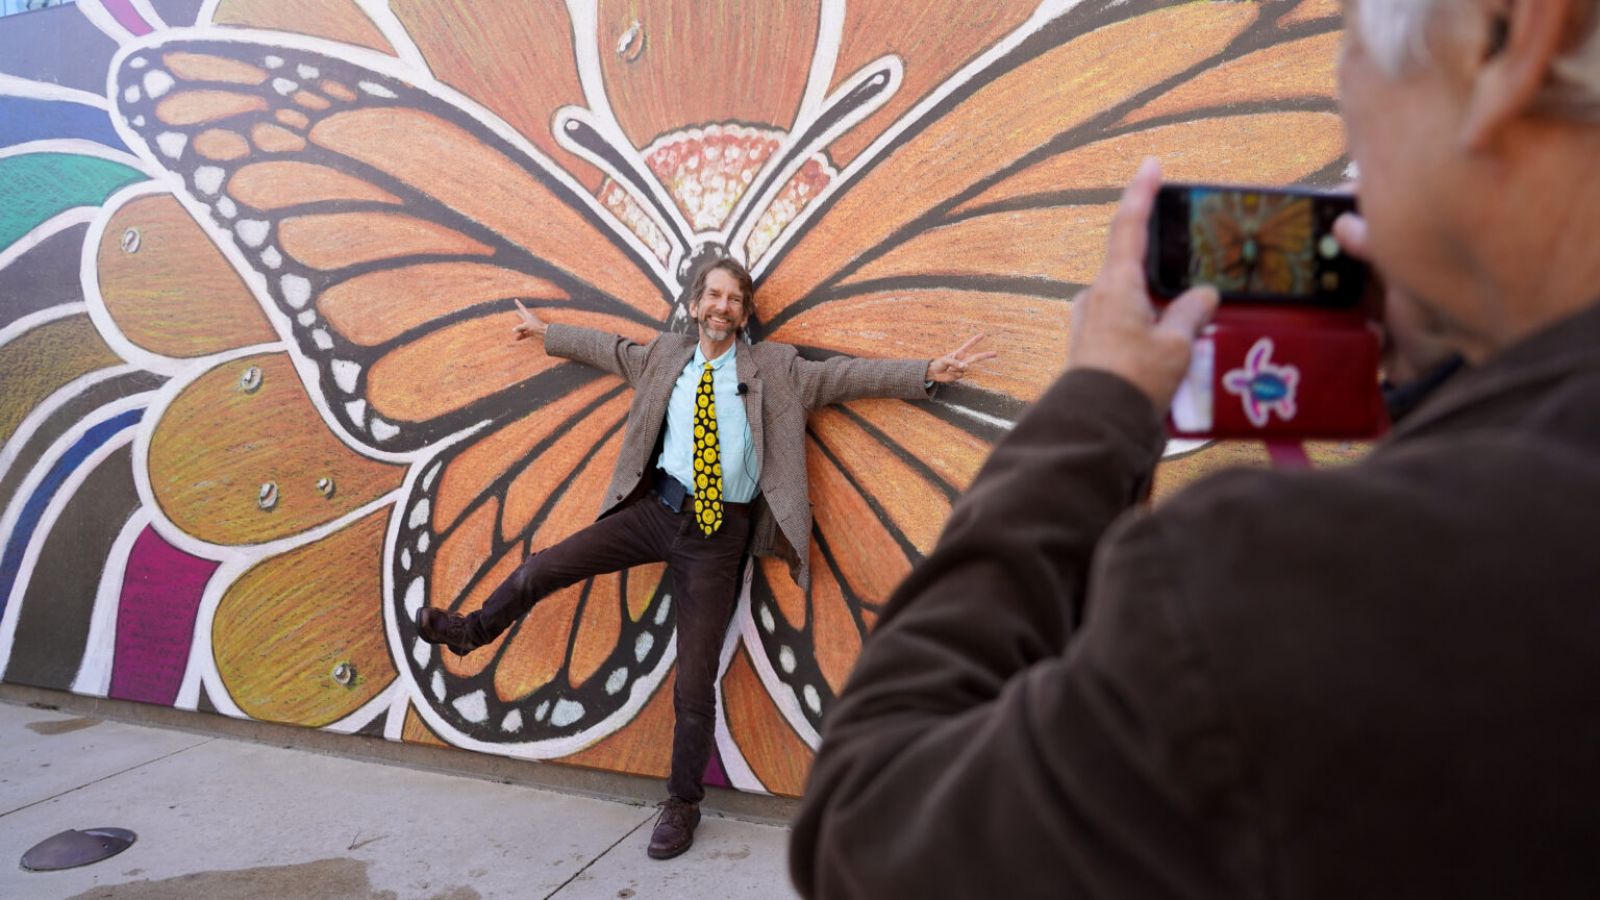 Robert Opel poses for a photo on Oct. 19 in front of his mural, “Wings of Joy,” which was the winning artwork for The Catholic Foundation’s 2022 Art On The Plaza competition. The mural will remain on display for one year in The Catholic Foundation Plaza, located behind the Cathedral Shrine of the Virgin of Guadalupe in the downtown Dallas Arts District. (Michael Gresham/The Texas Catholic)